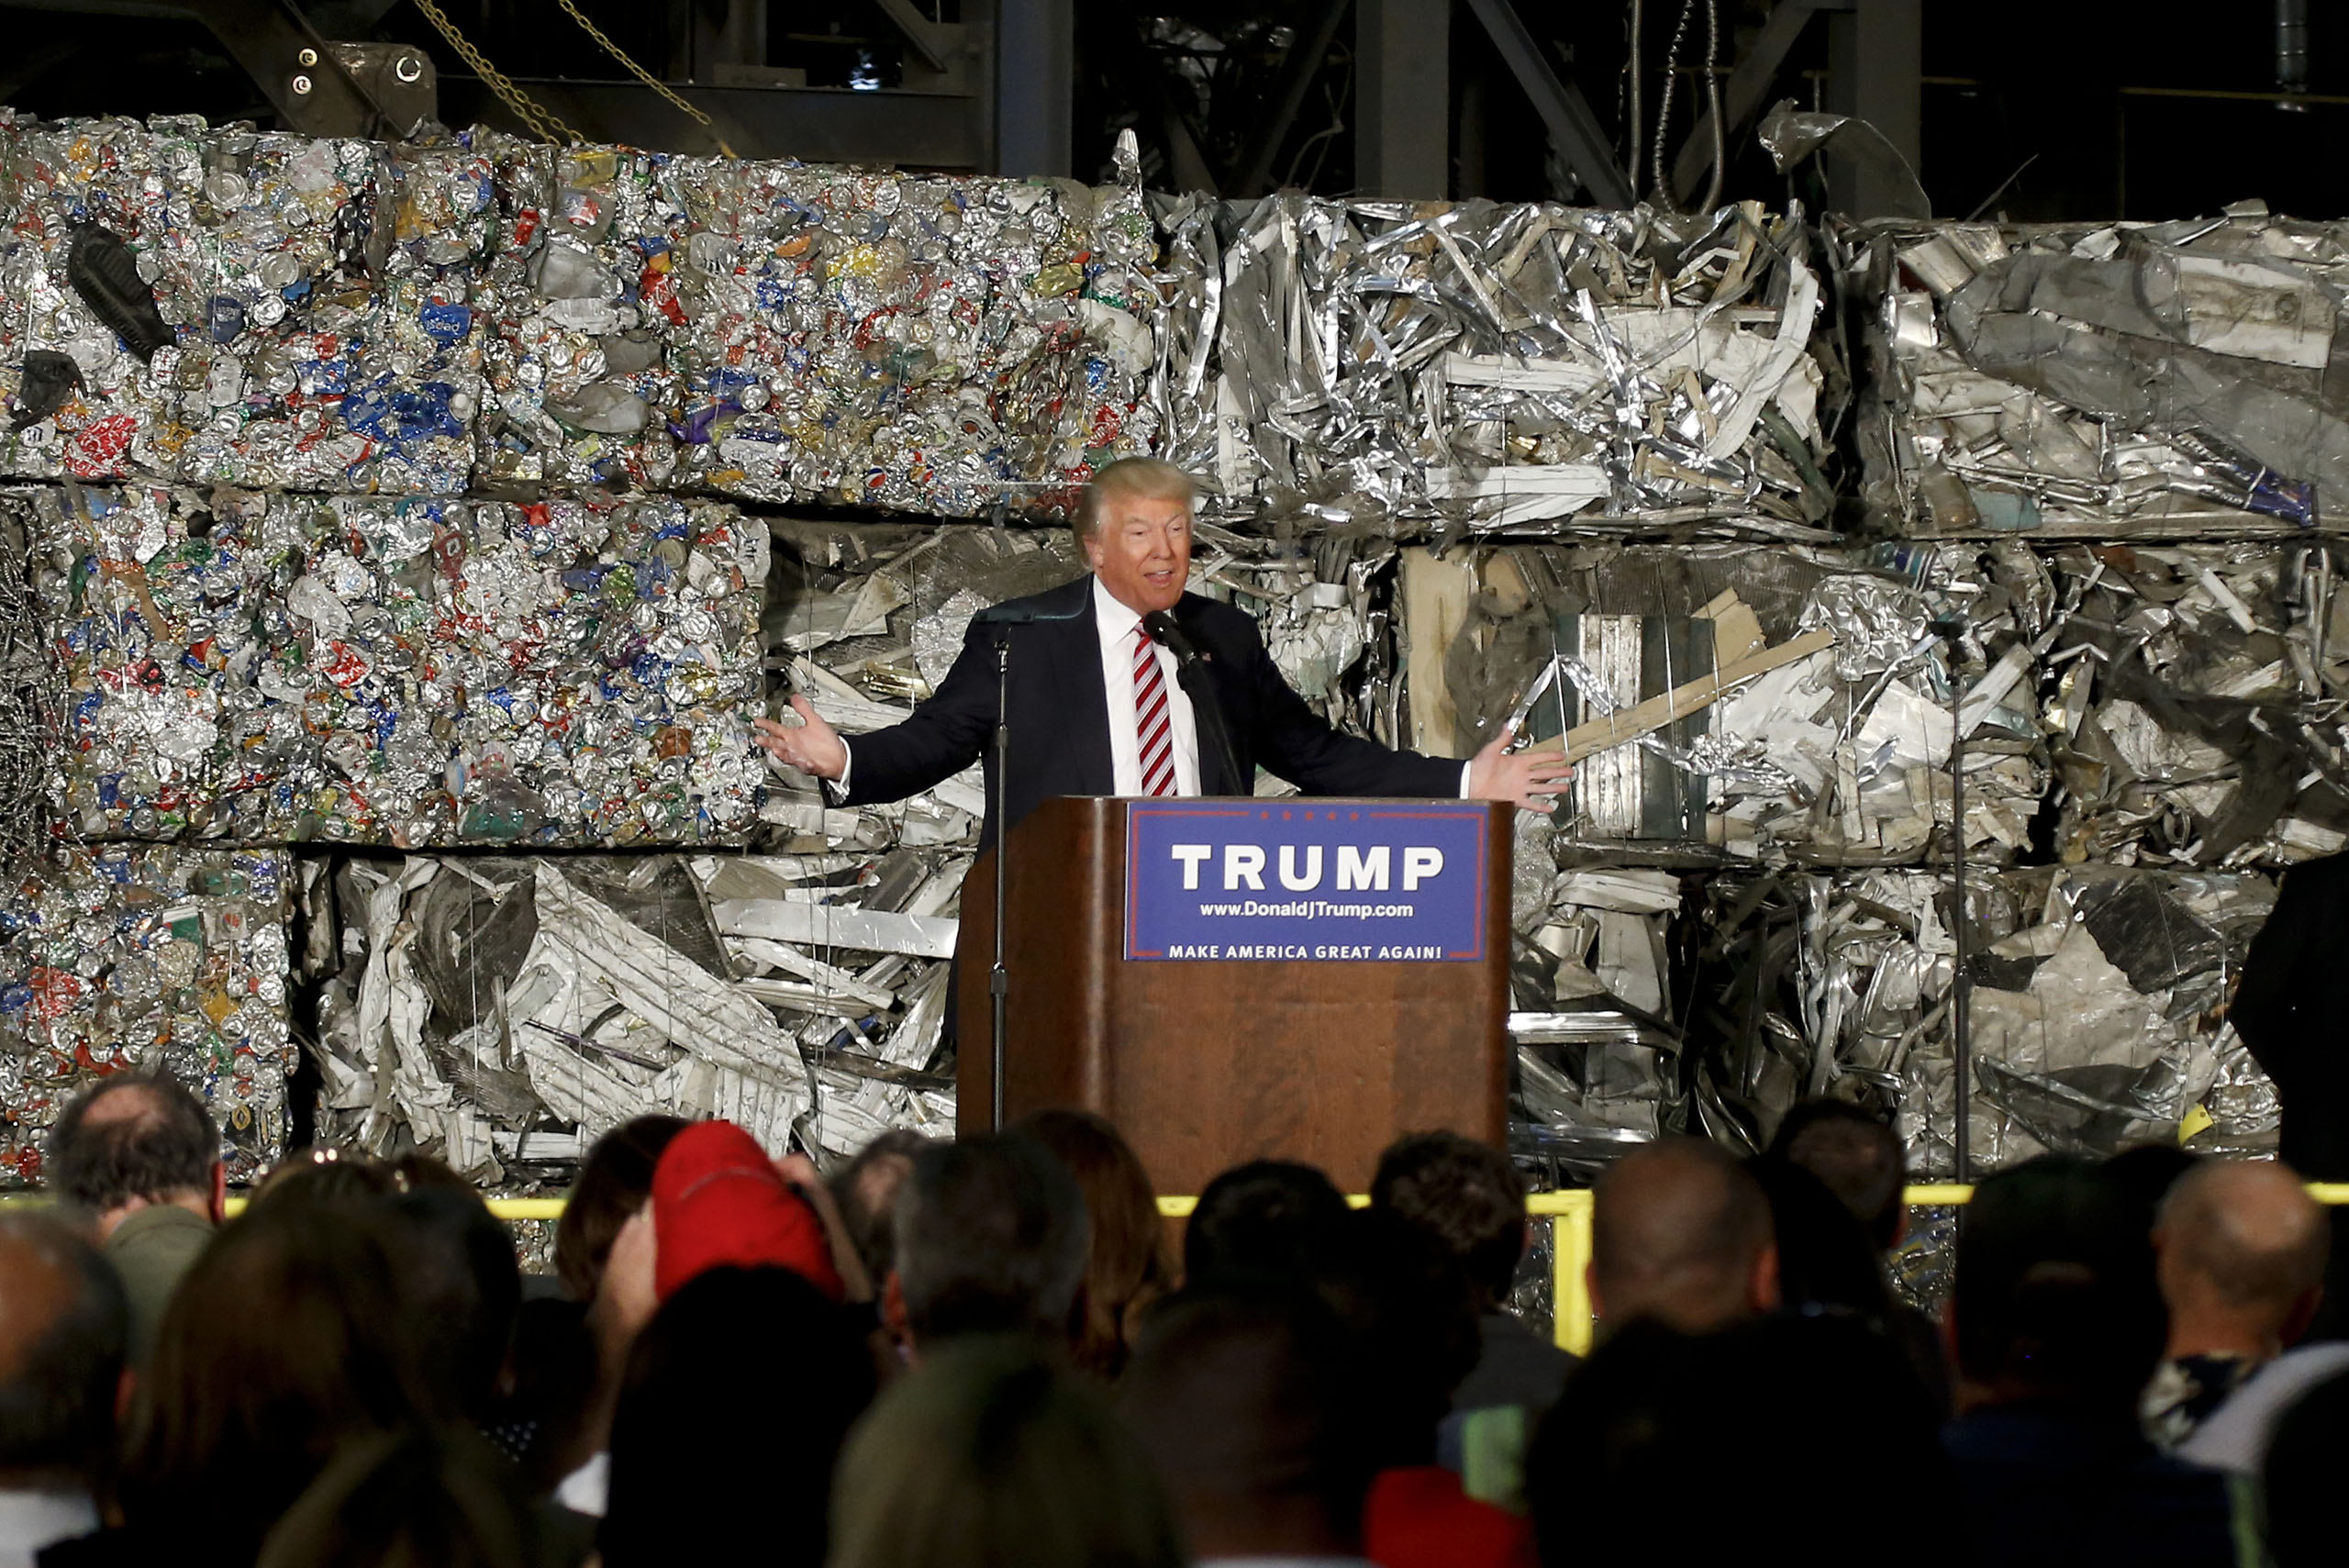 Donald Trump speaks during a campaign stop at Alumisource, a metals recycling facility in Monessen, PA, June 28, 2016. (Keith Srakocic—AP)